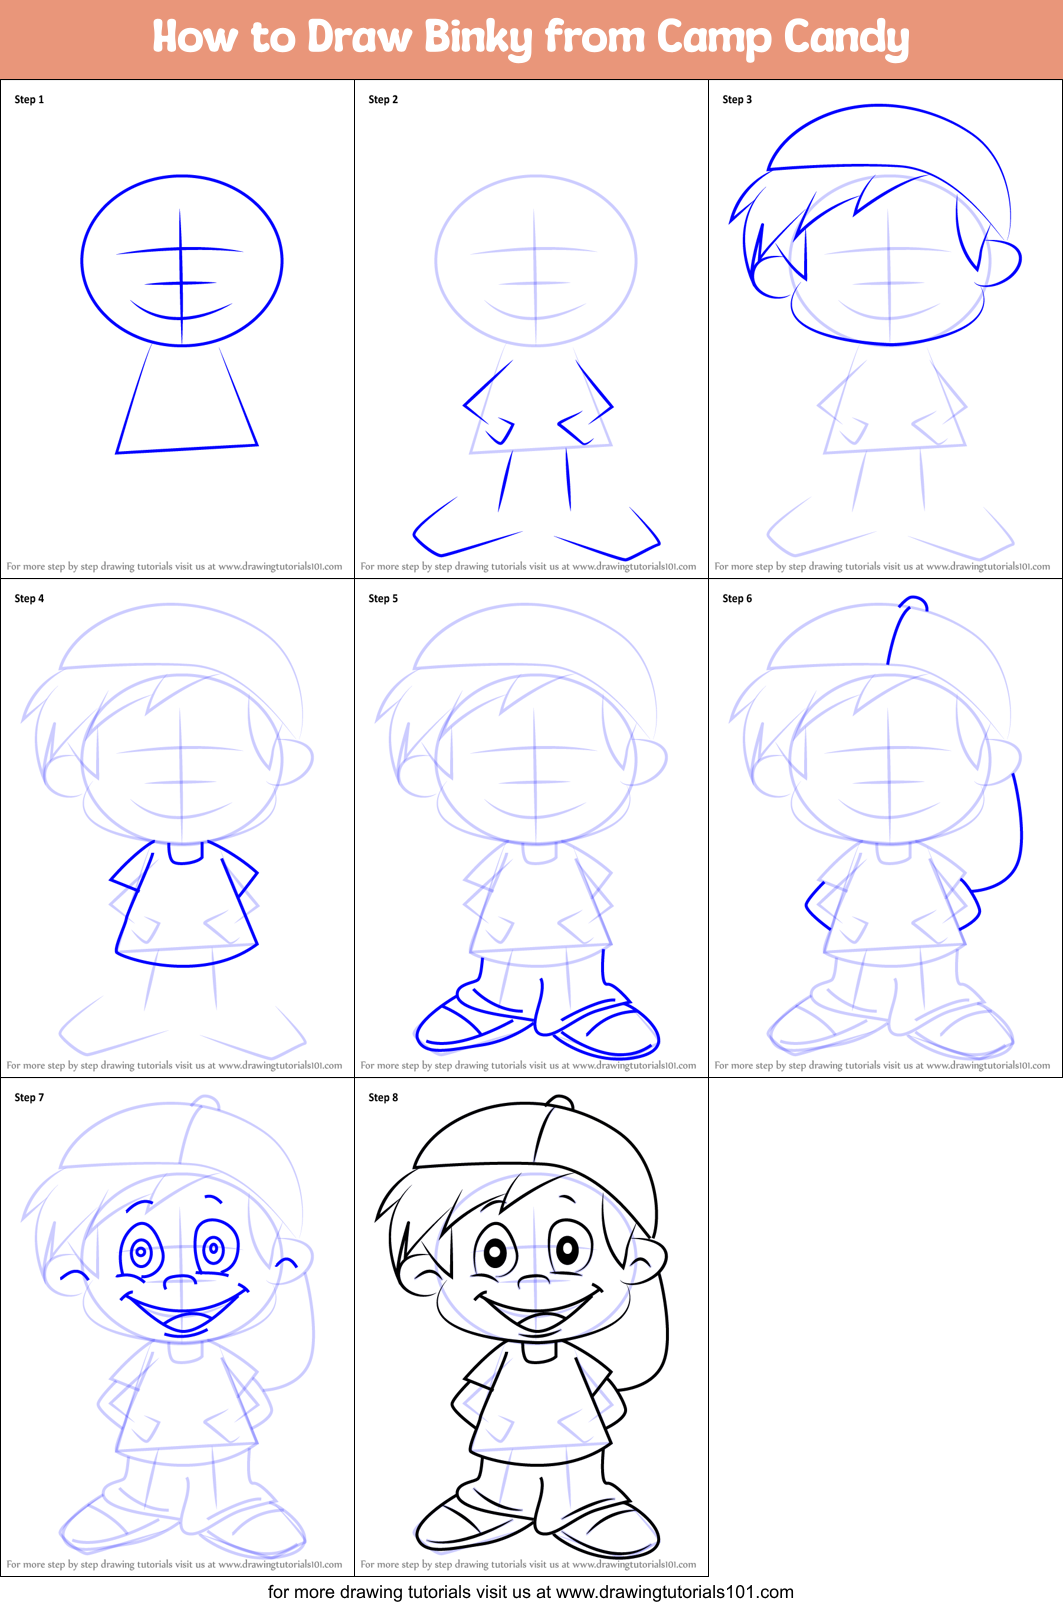 How to Draw Binky from Camp Candy printable step by step drawing sheet